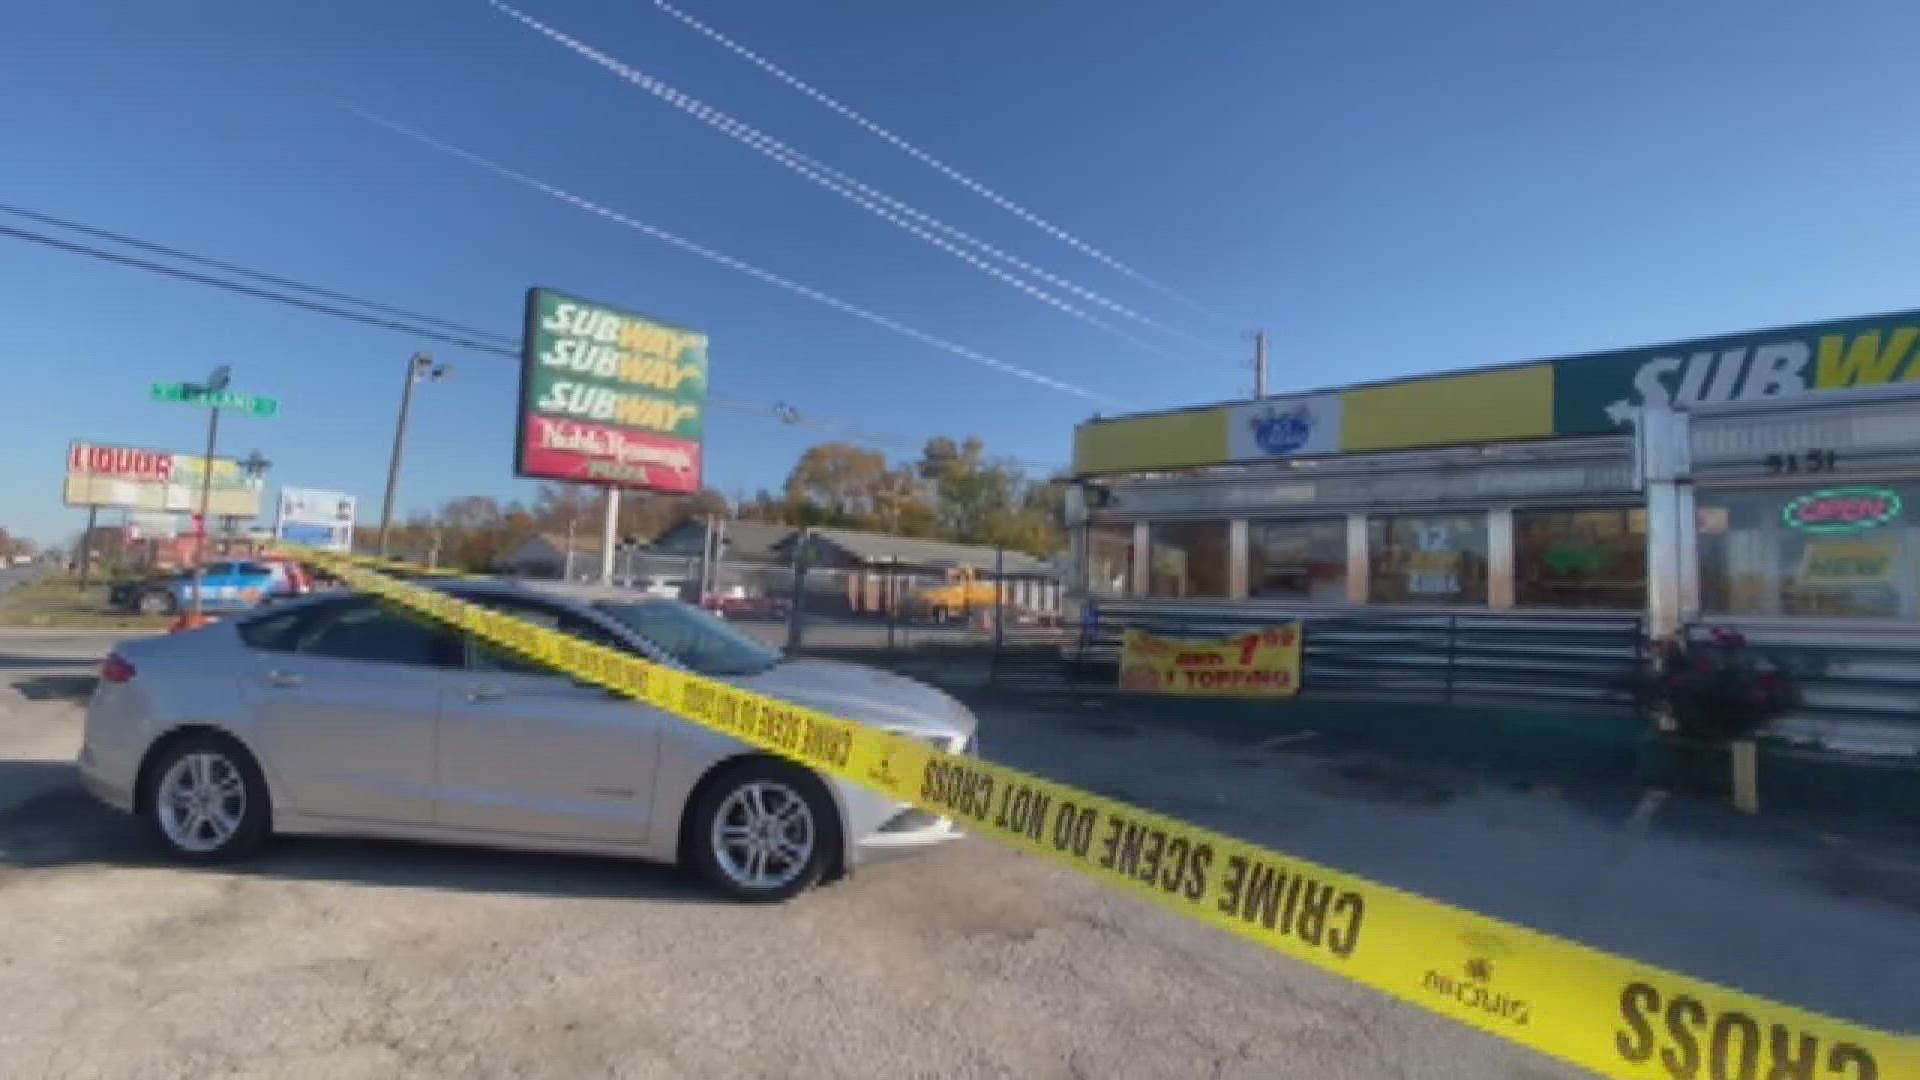 A man died and a woman was wounded in a shooting Friday afternoon. The victims were found outside a Subway restaurant at 38th and Emerson.